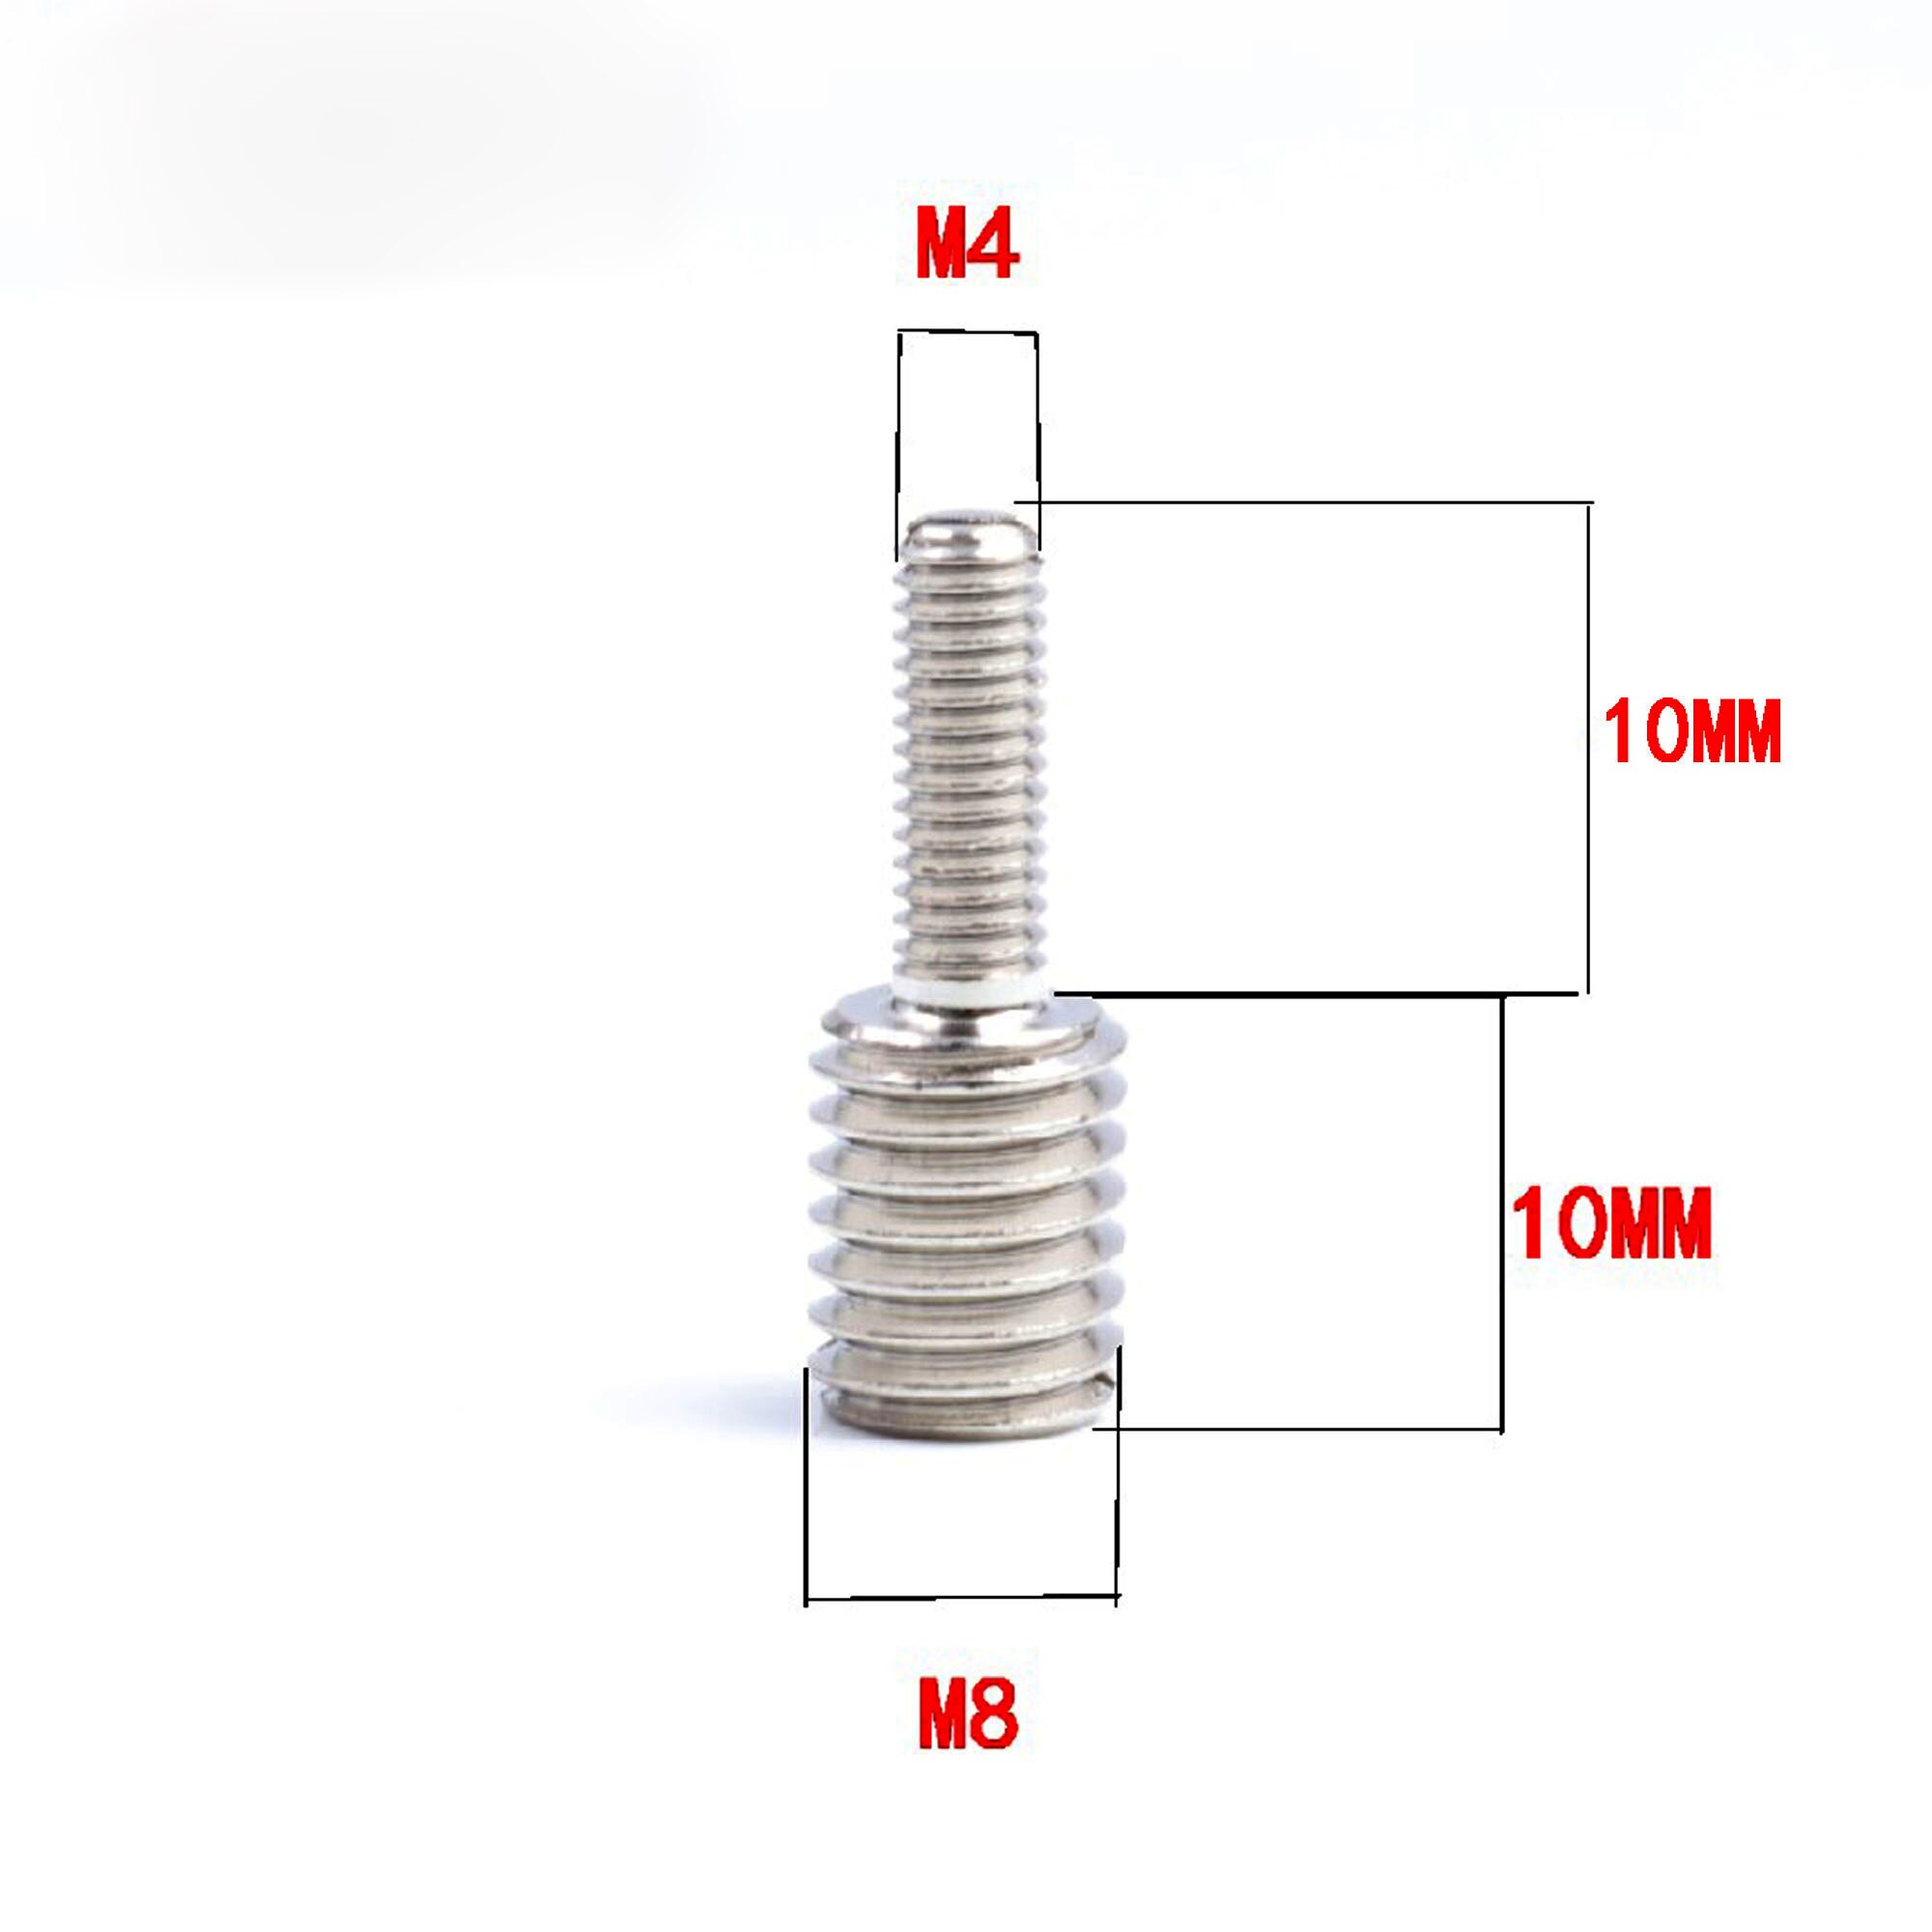 stainless steel M8 to M6 M4 M10 conversion screw variable diameter screw amplifier footpad installation screw M8 to M4: M8 TO M4